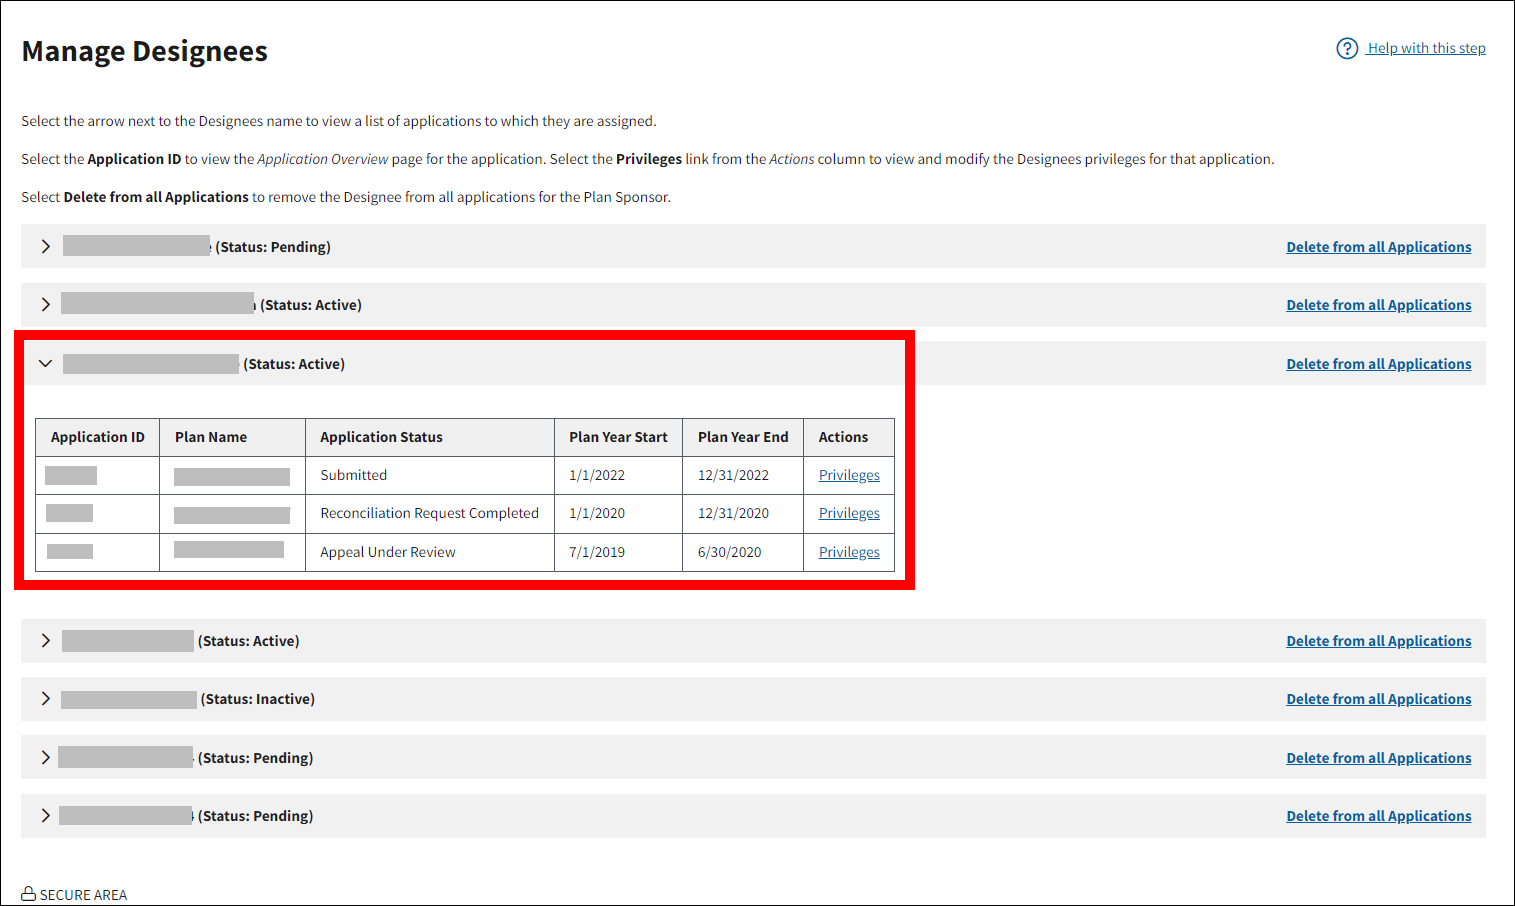 Manage Designees page with sample data. Expanded Designee section with applications table is highlighted.